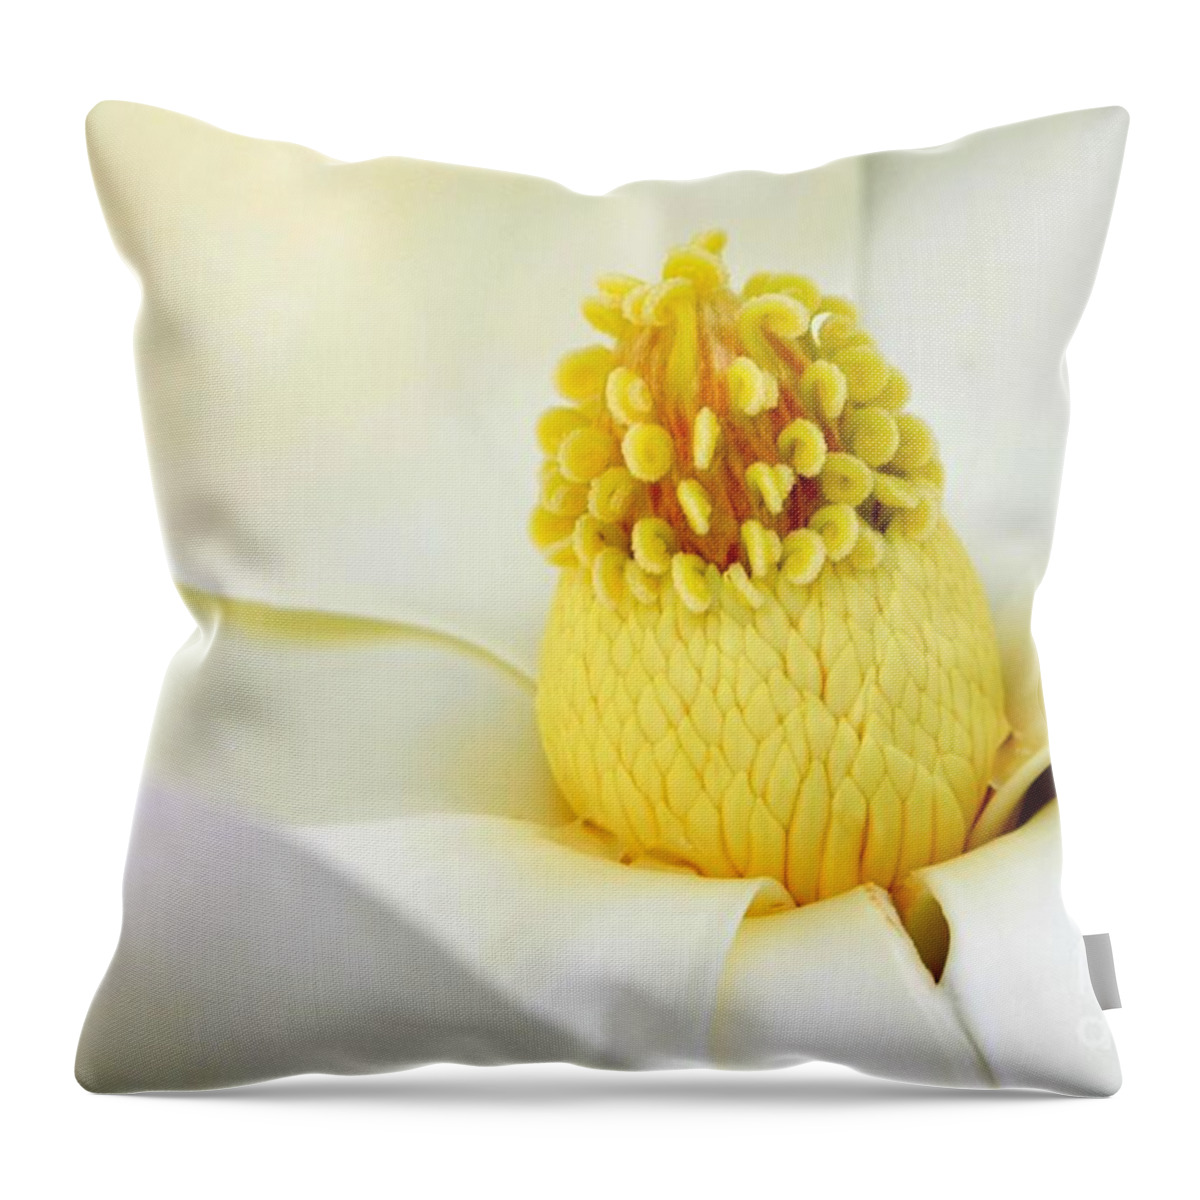 Magnolia Throw Pillow featuring the photograph The Luscious Magnolia by Mary Deal